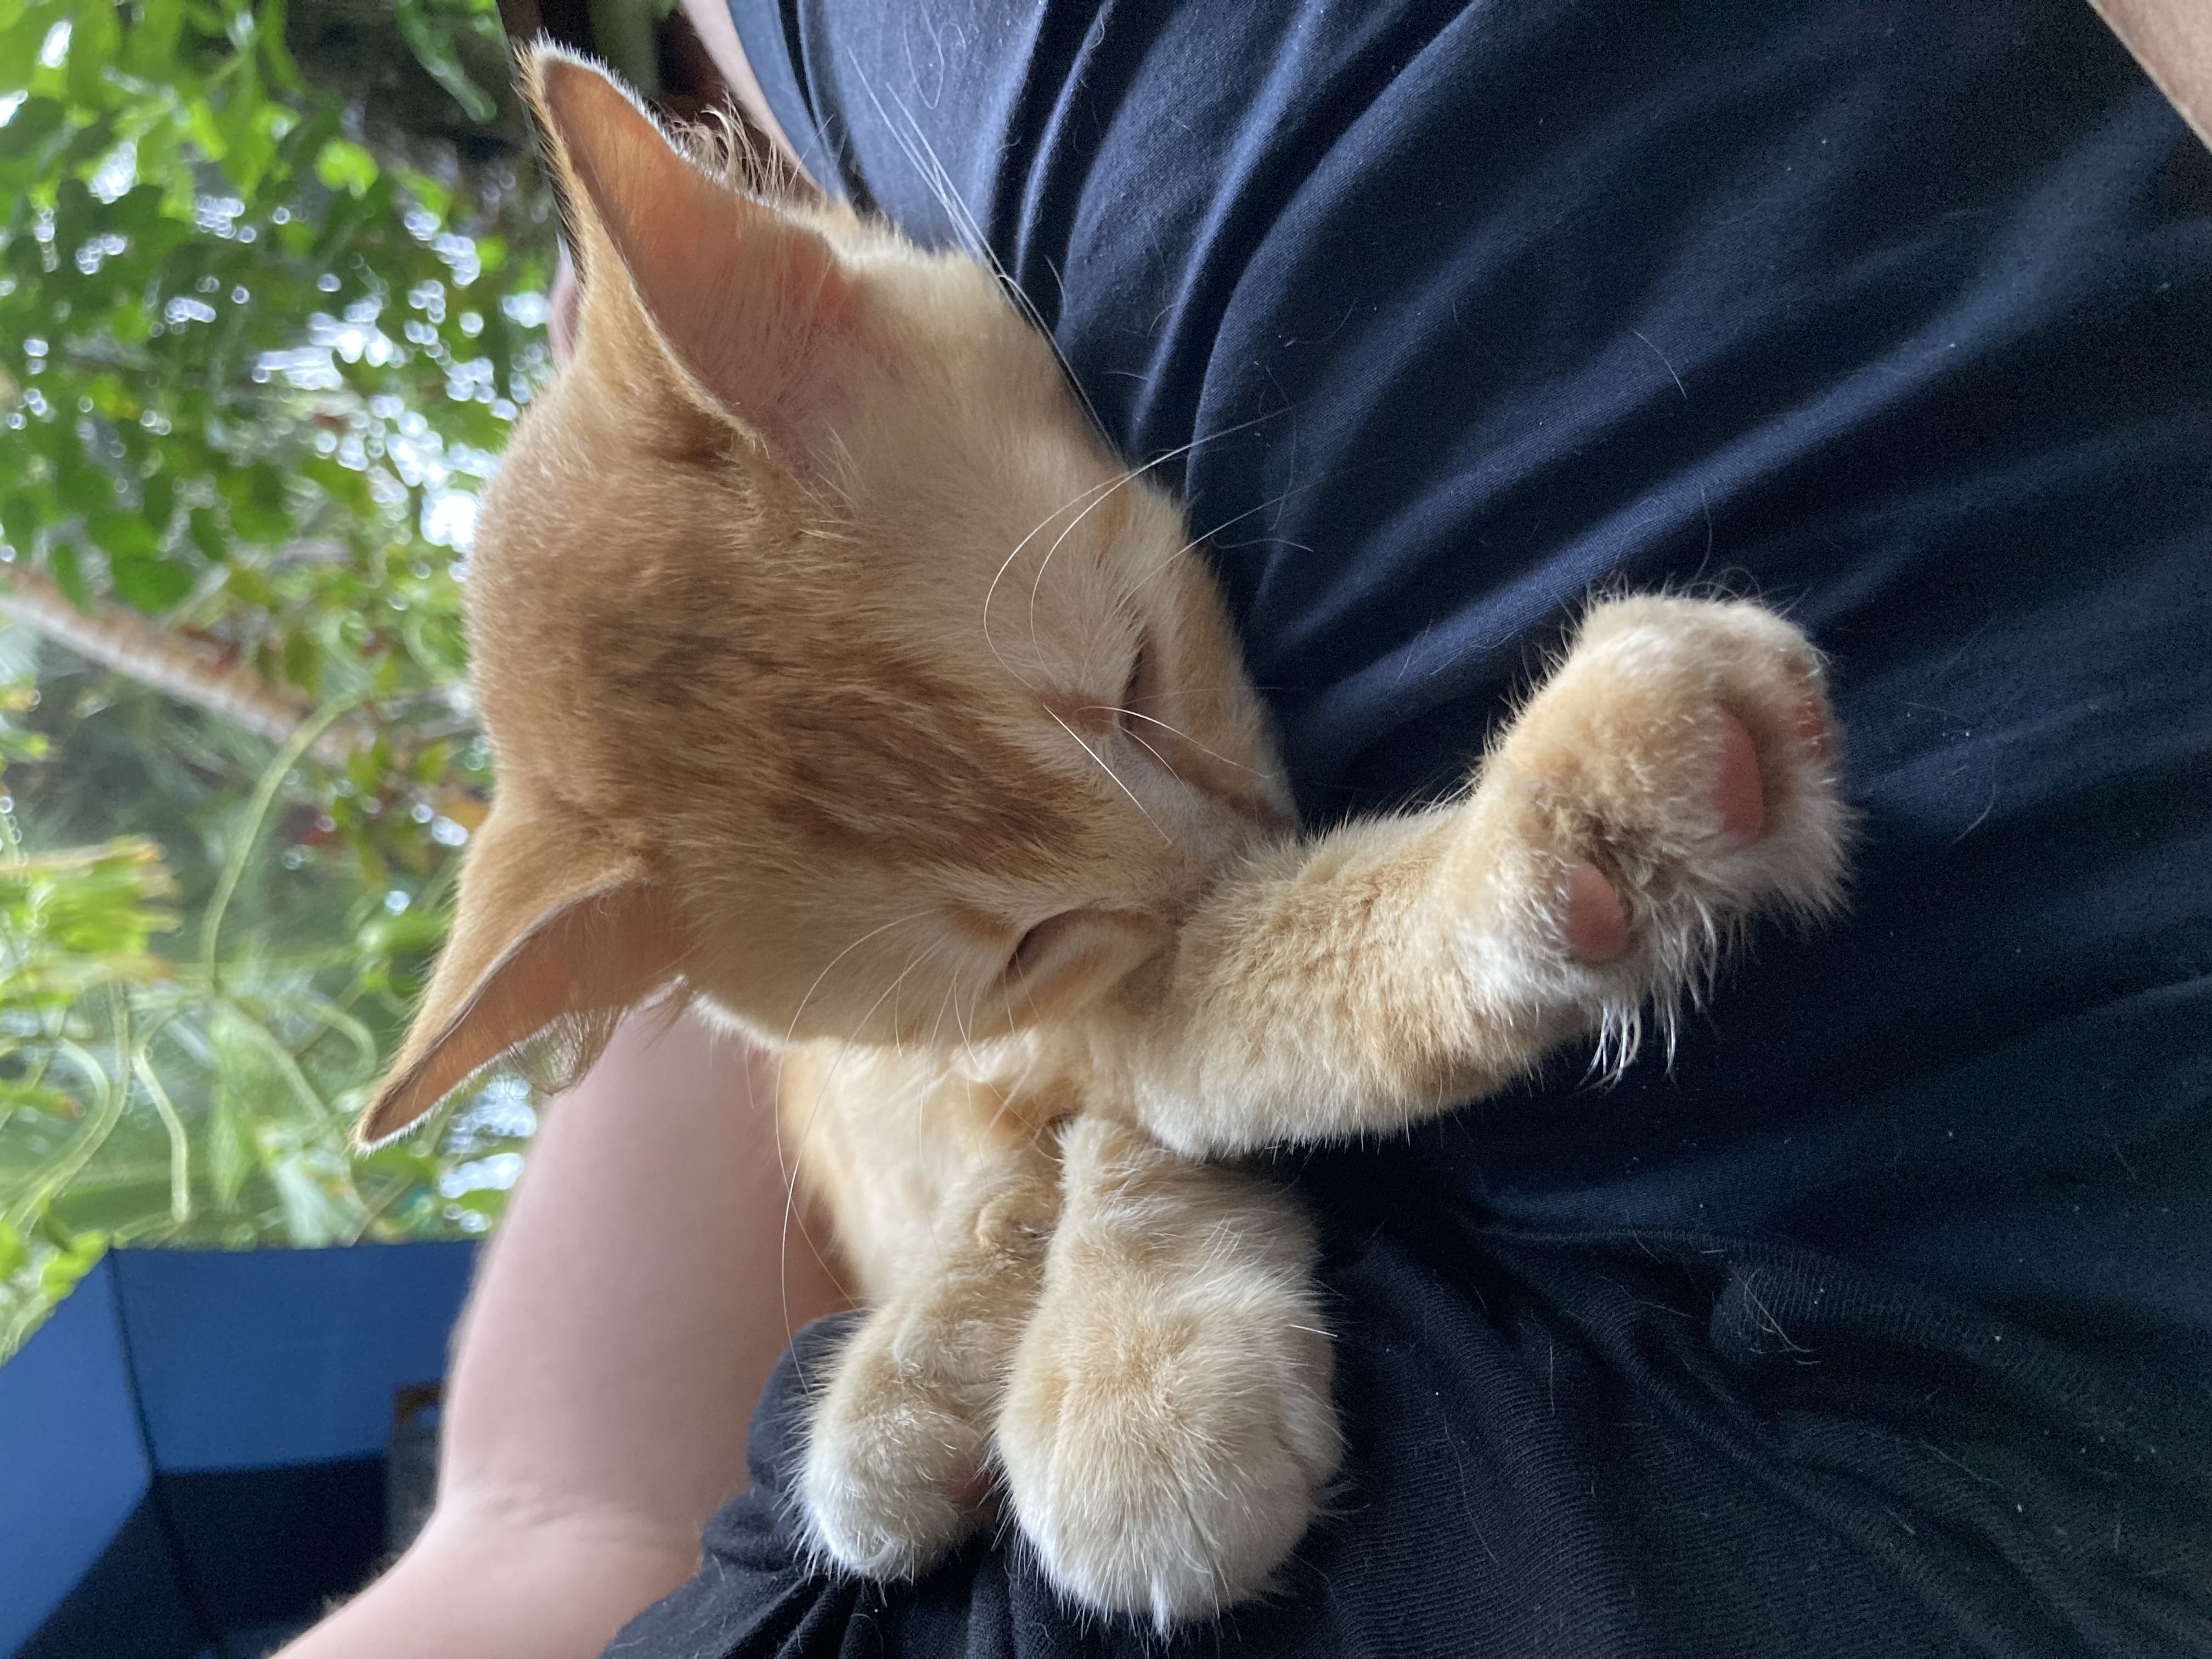 Cat sleeping on the lap of a man stretching the paws out